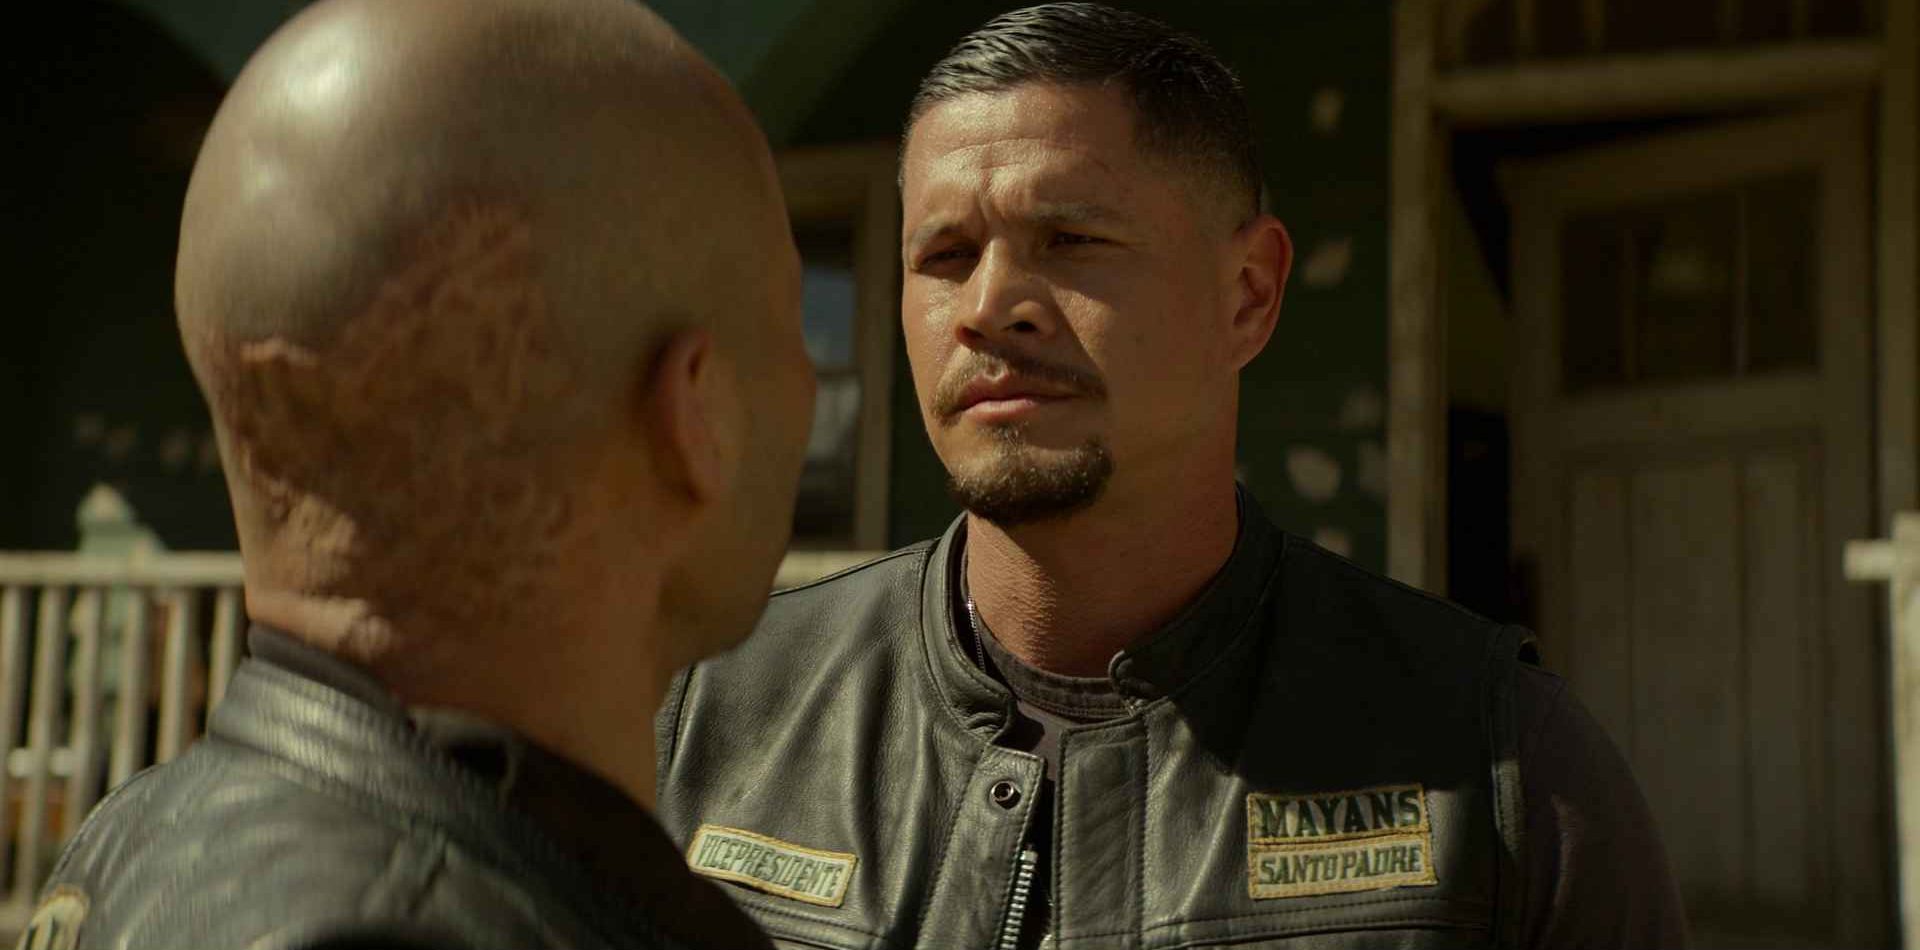 Events From Mayans M.C. Season 4 Episode 4